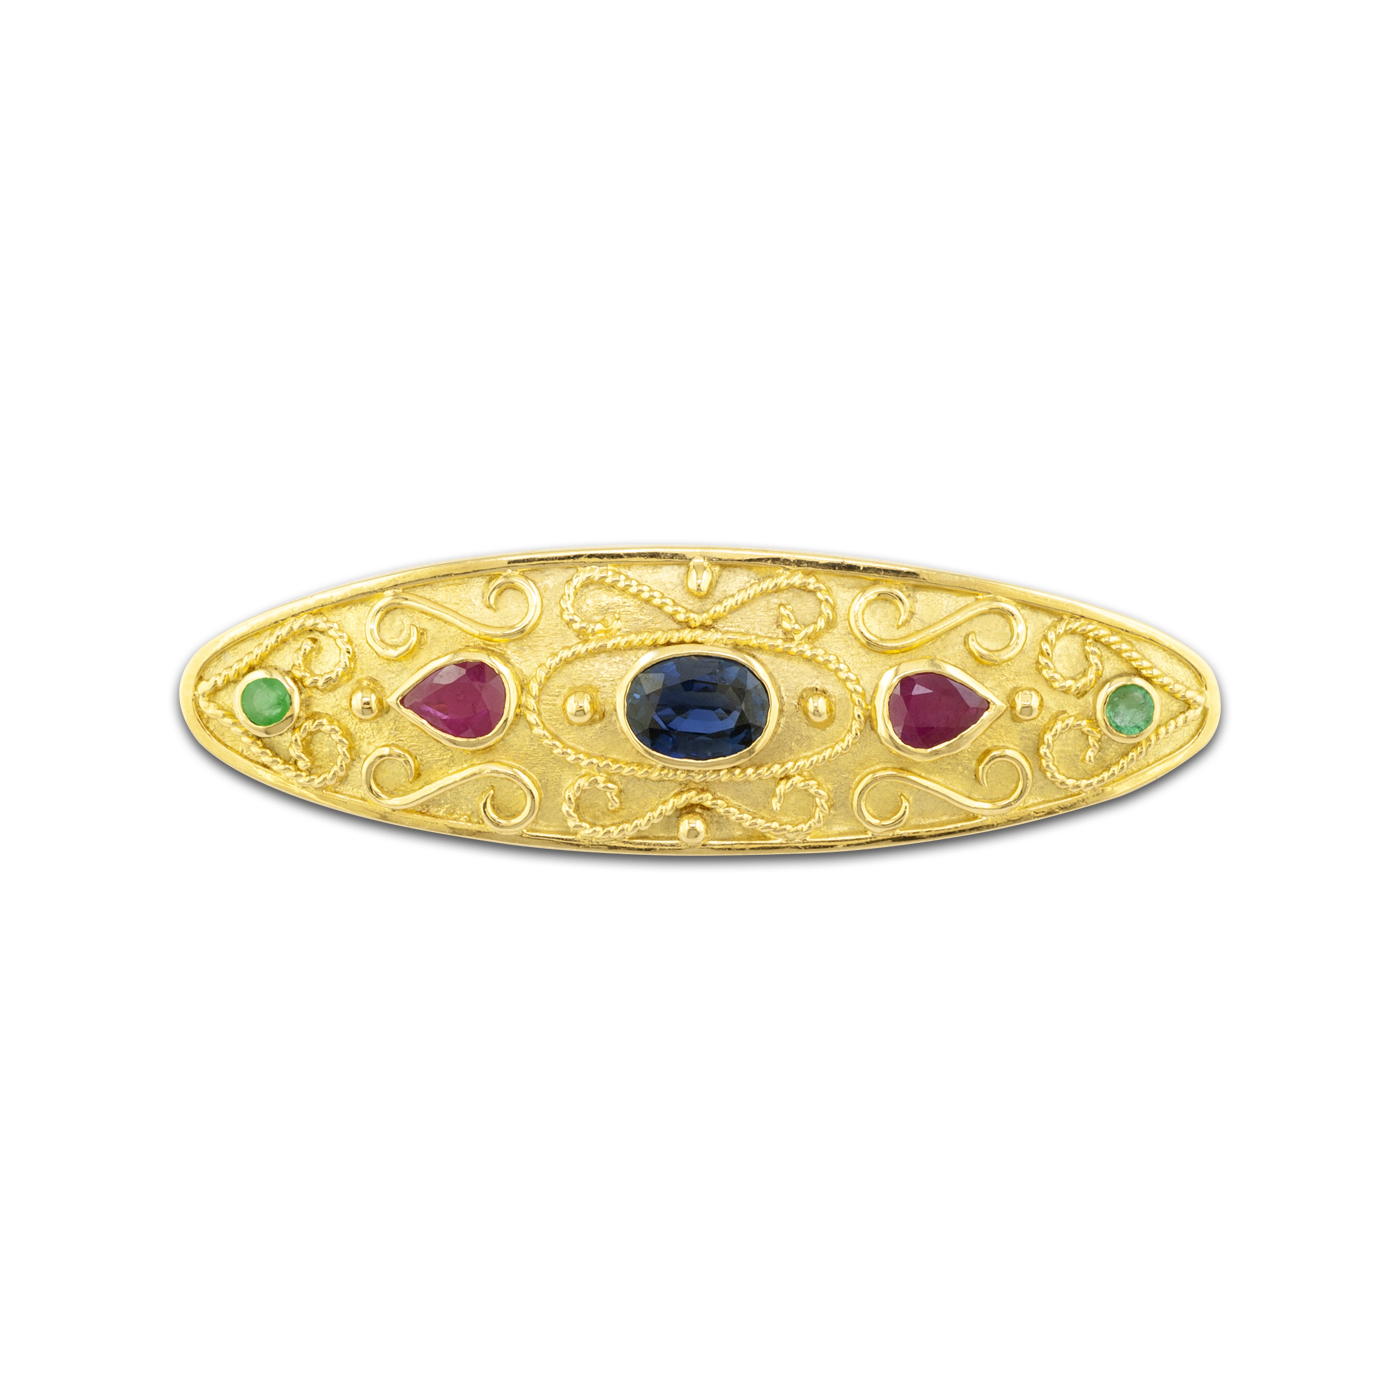 Imperial gold pin with precious stones